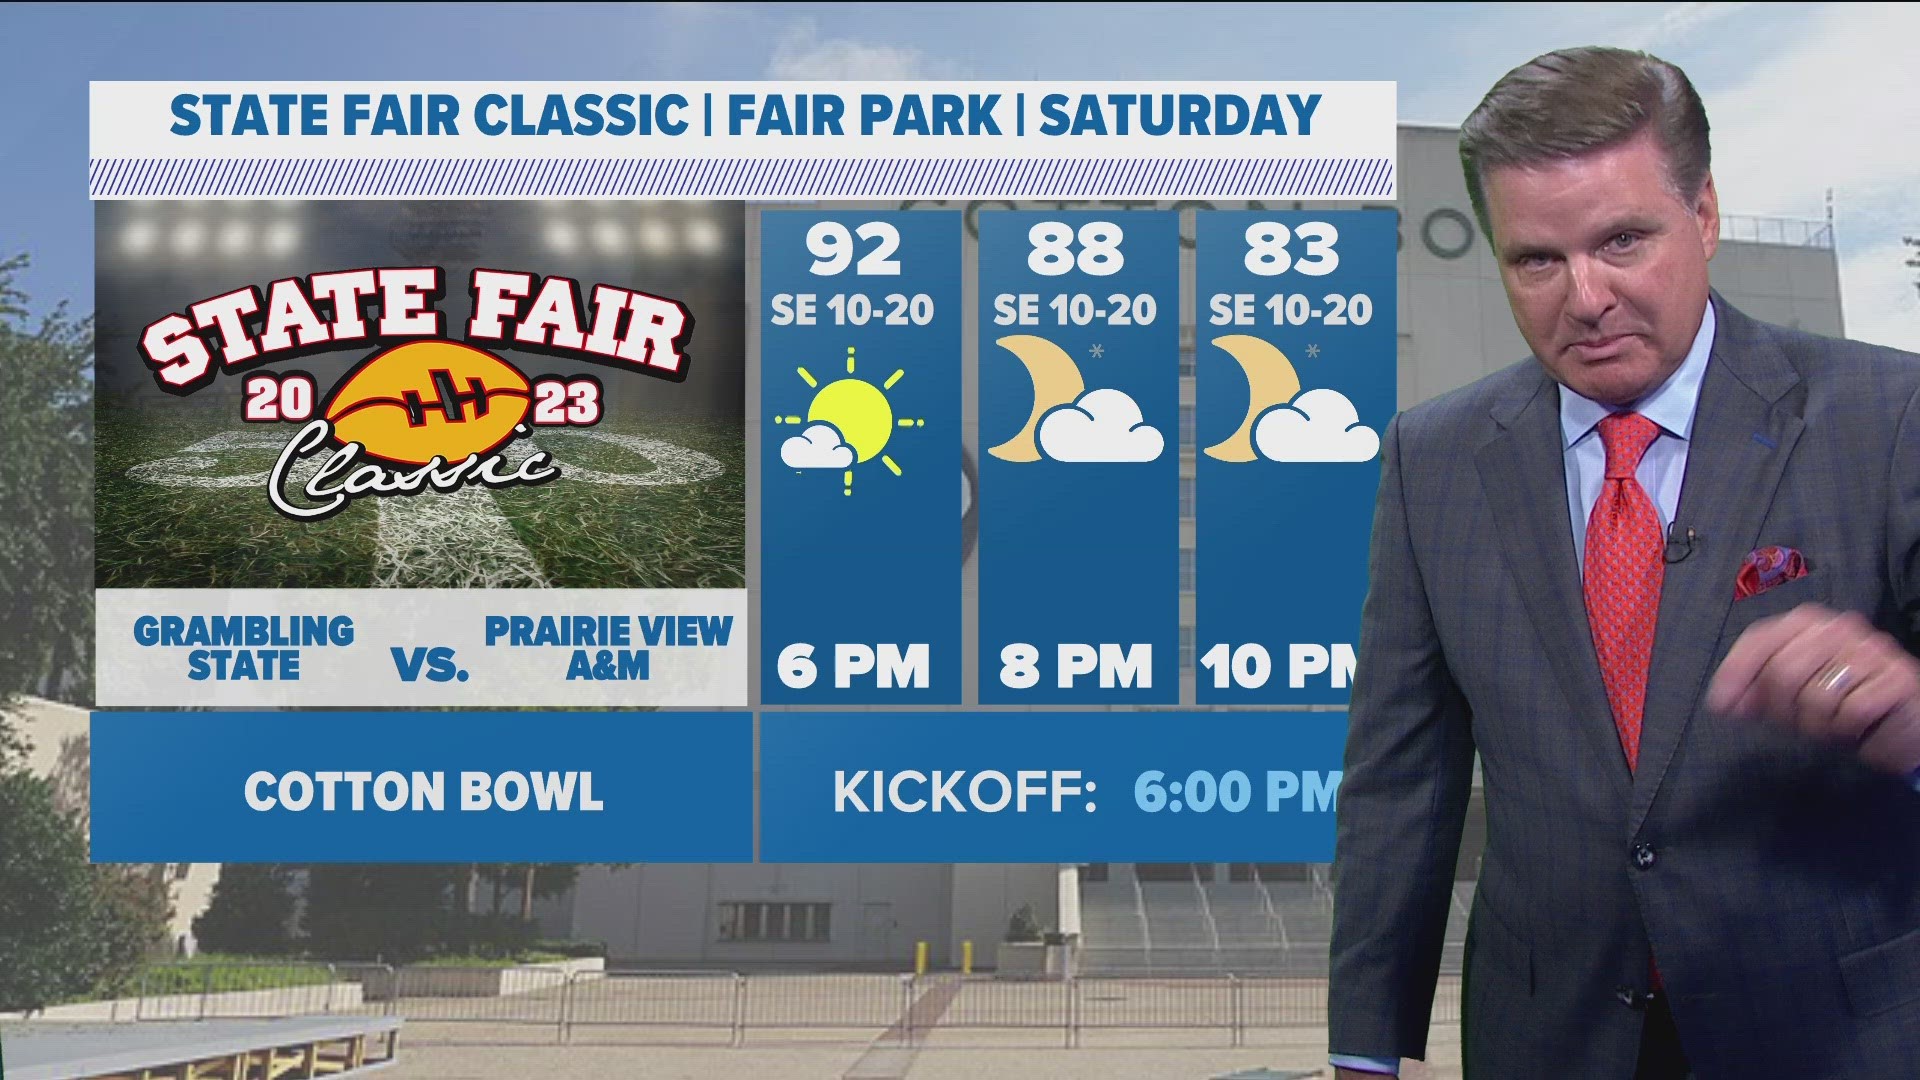 For those heading to the State Fair of Texas this weekend, expect temperatures in the high 90s.